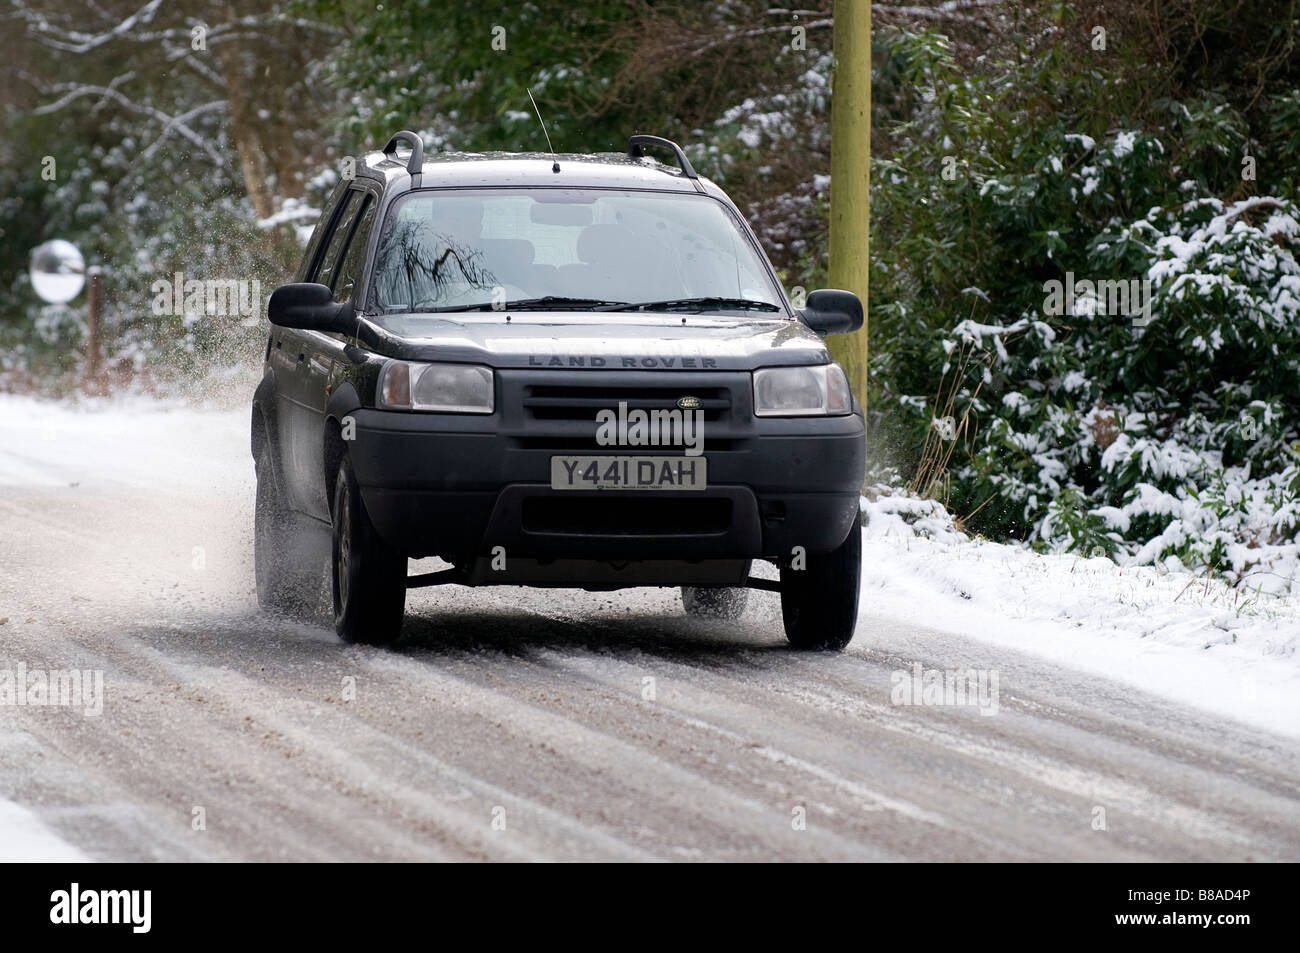 Land rover driving down a snowy country road Stock Photo